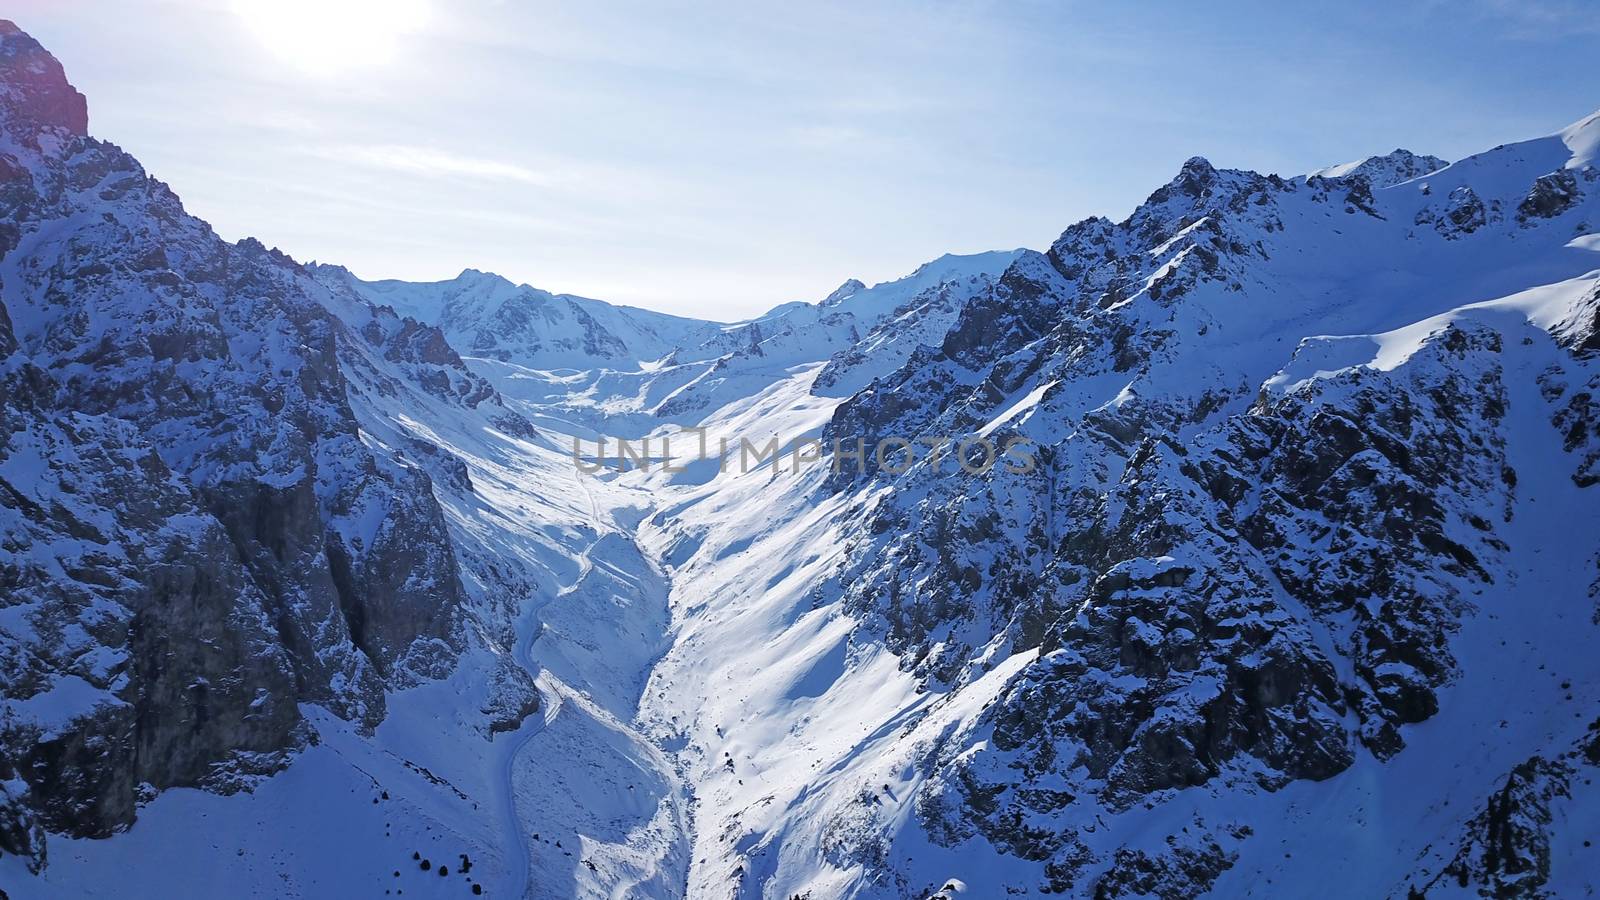 High snowy mountains, spruce trees grow in places. Huge rocks and cliffs, gorges where there may be an avalanche. Top view from a drone. Sunny day, shadows from the mountains fall on the snow. Almaty